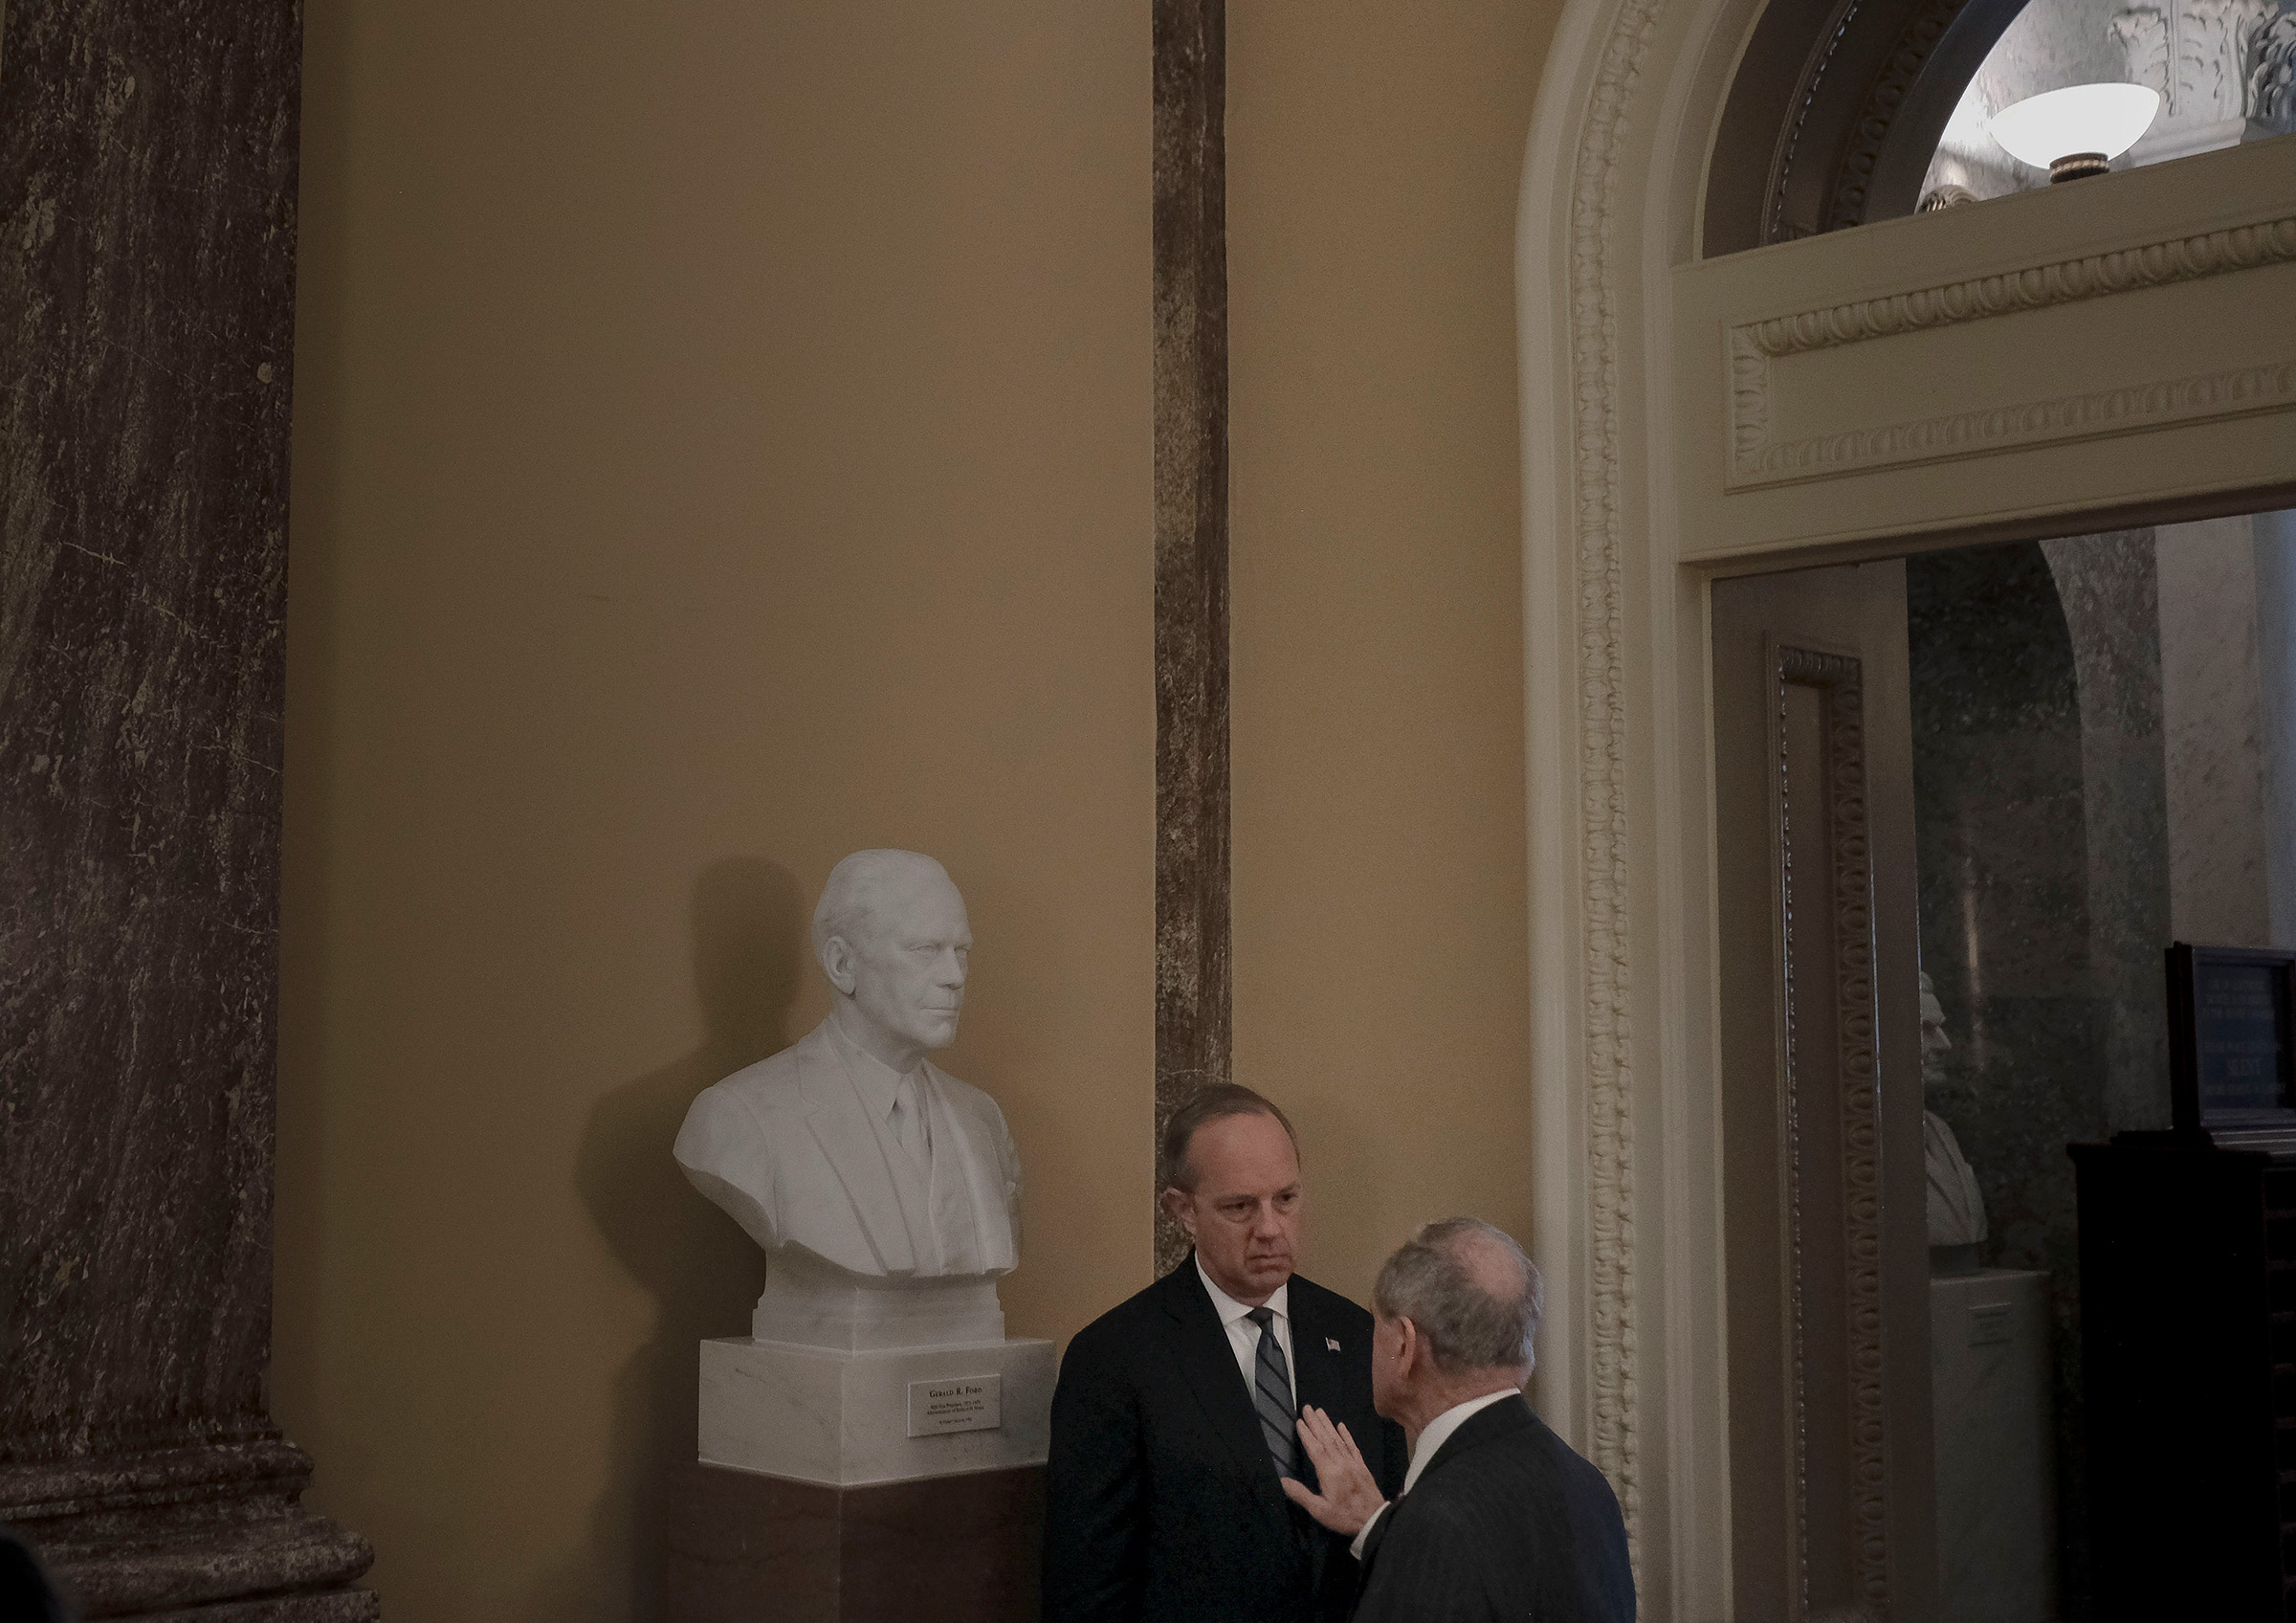 Sen. Jim Risch (R-Idaho) has a private conversation with White House legislative affairs director Eric Ueland off the floor of the senate before the impeachment trial at the Capitol in Washington, D.C., on Jan. 24, 2020. (Gabriella Demczuk for TIME)